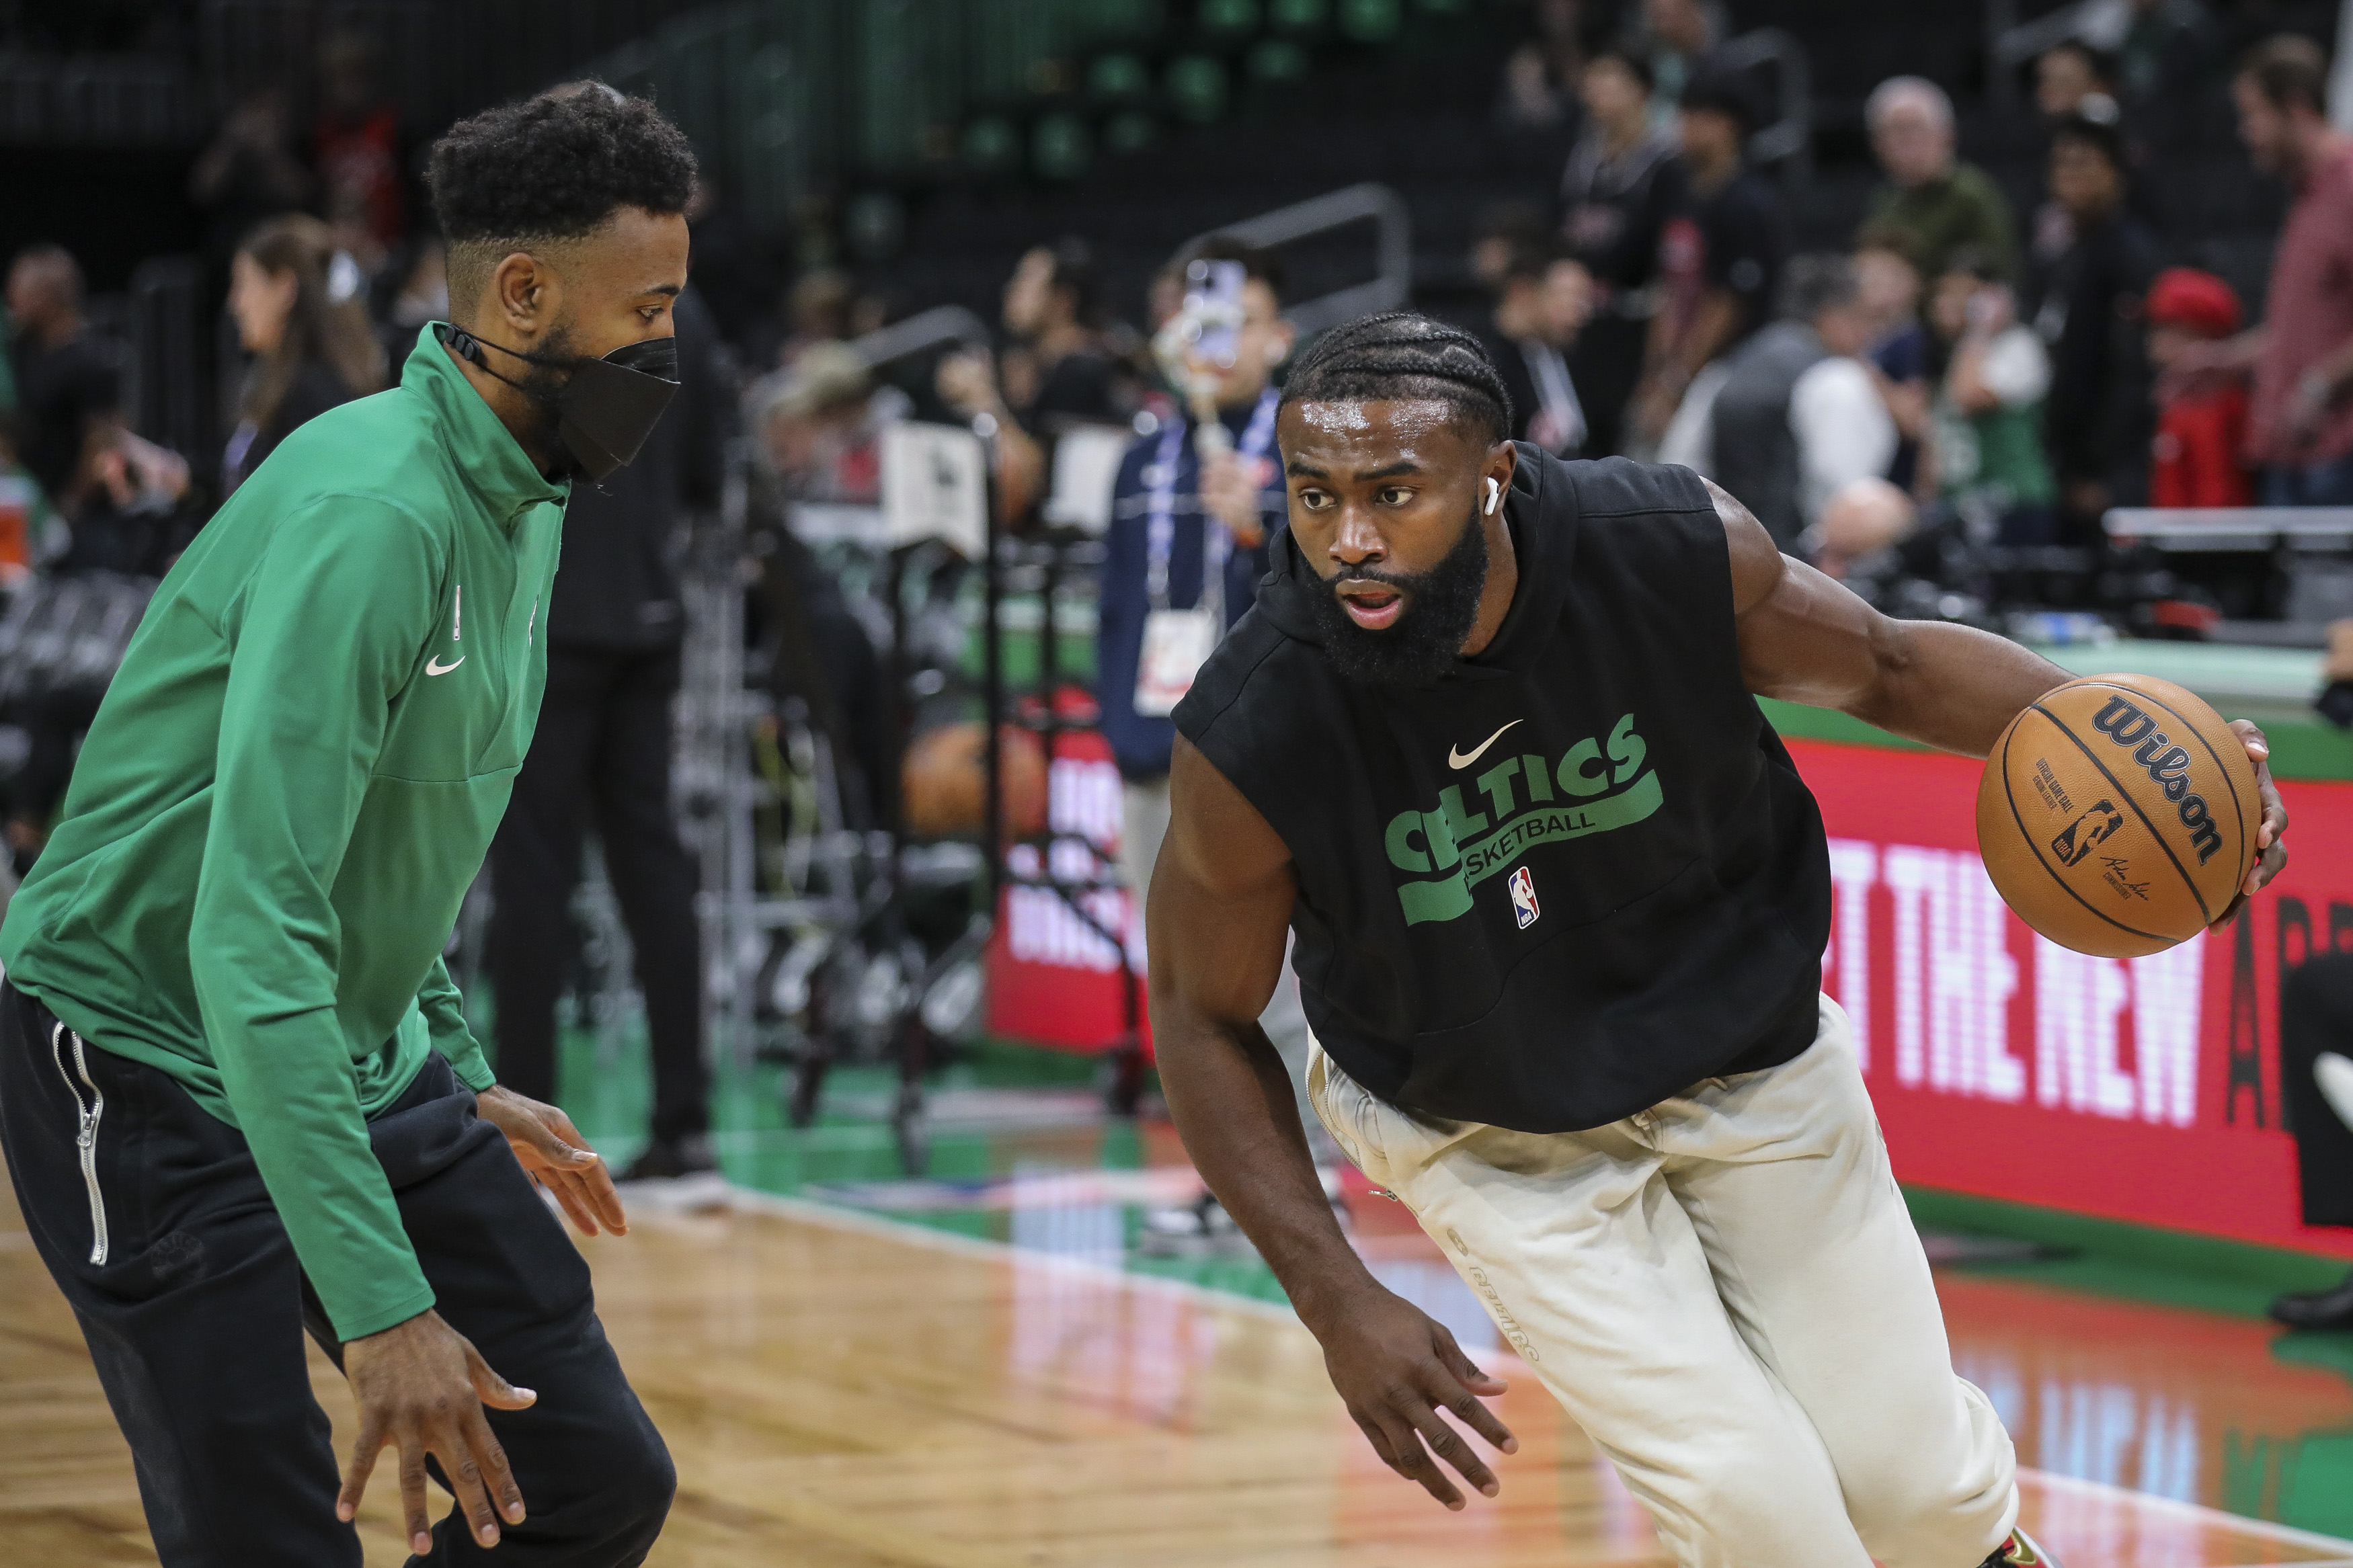 Jaylen Brown leaves Donda Sports after initially remaining onboard